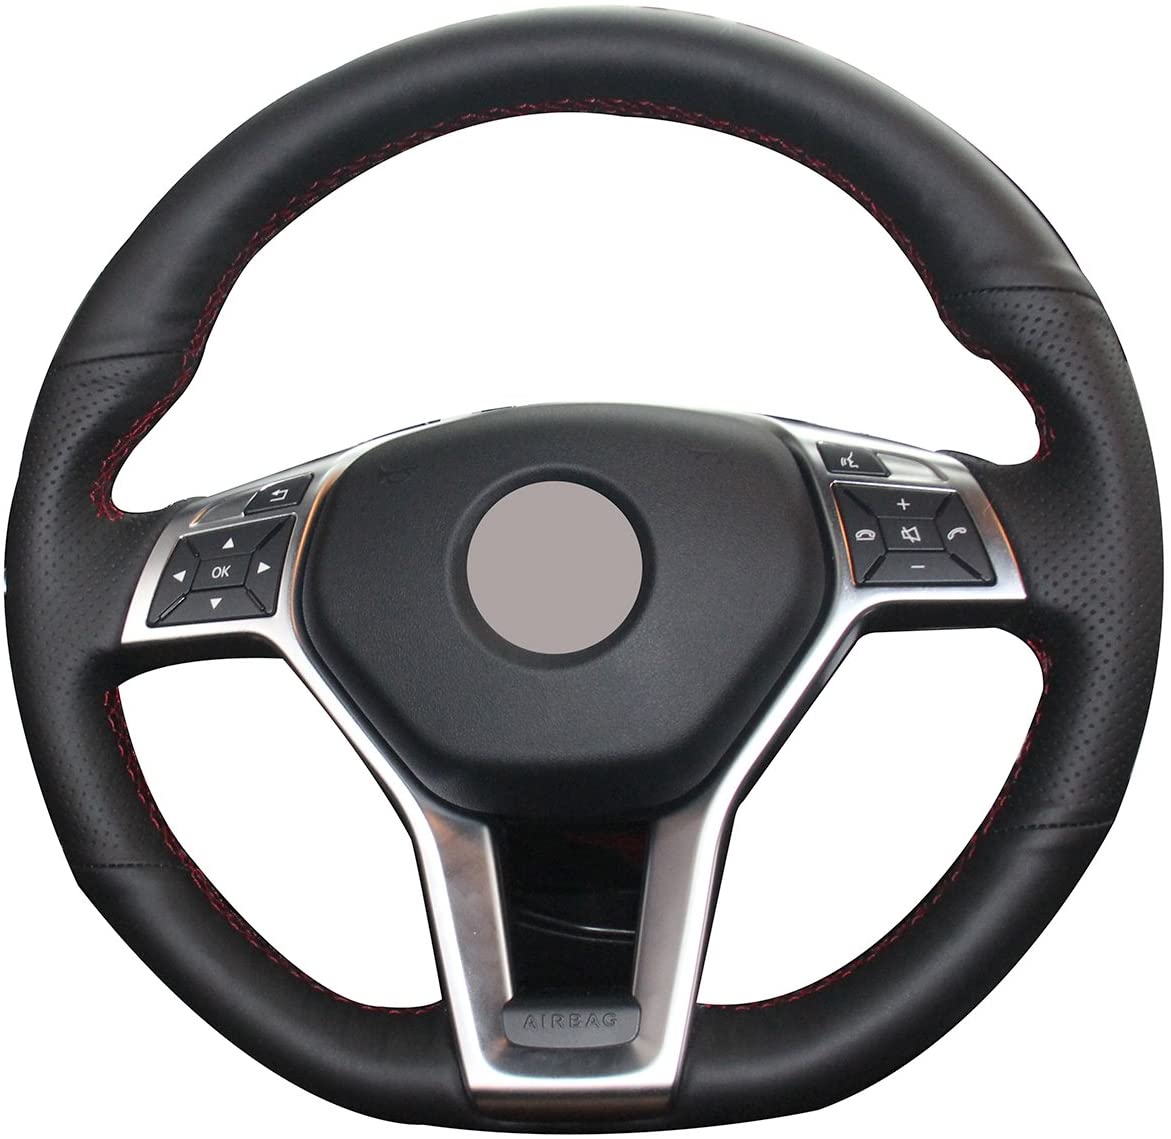 

Black Leather Suede Steering Wheel Cover for Benz C350 C250 C300 CLA250 CLS550 E250 E350 E400 E550 GLA45 AMG SL550 SLK250 SLK300 SLK350